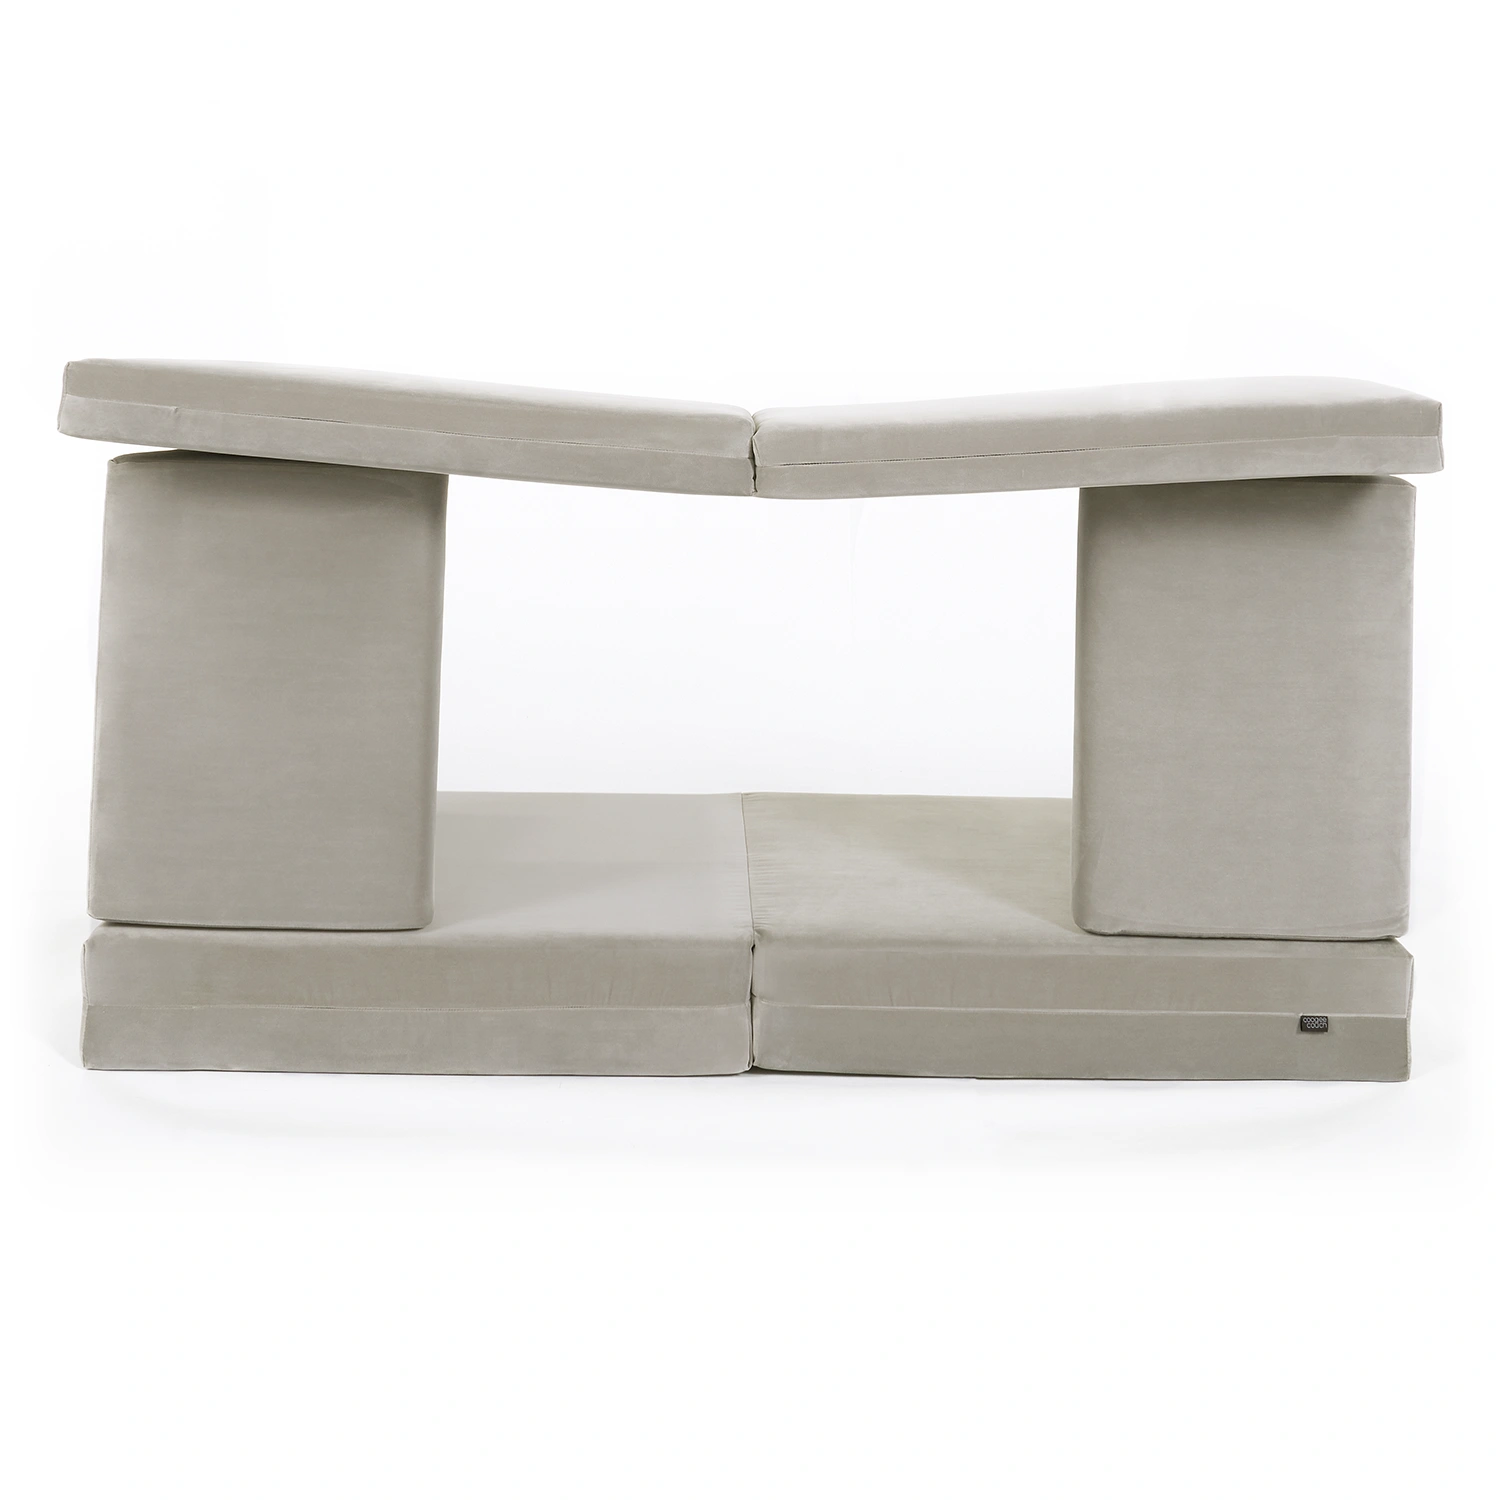 coogeecouch | Kindersofa | Serie: fairymuchfun | Farbe: steel-grey grau | Ansicht: Front Höhle | made in Germany